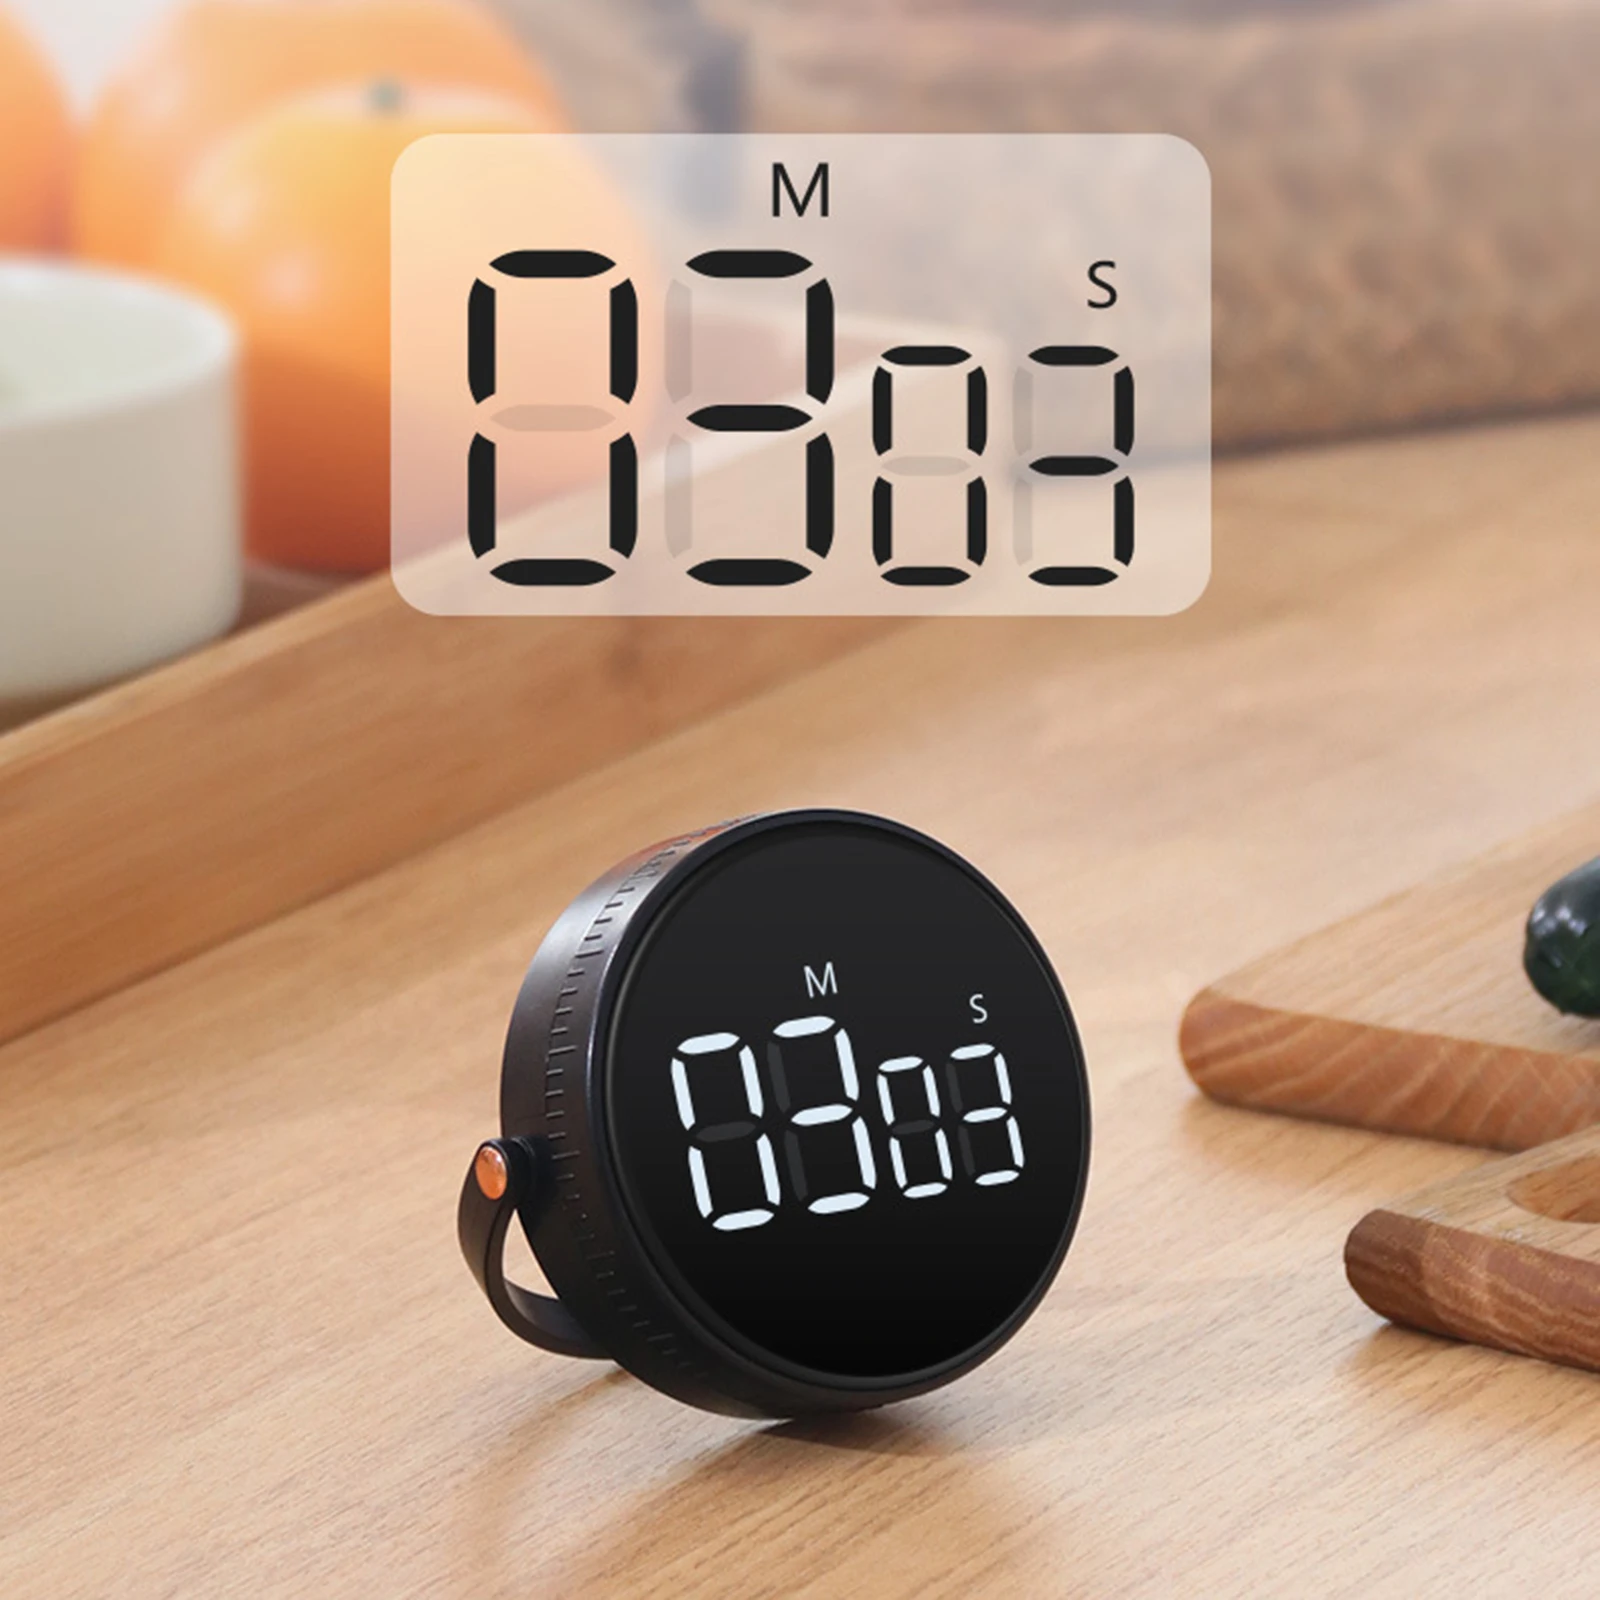 https://ae01.alicdn.com/kf/S387e80ecc7c34de3857aa69eca0746edG/Magnetic-Countdown-Countup-Timer-LED-Display-Volume-Adjustable-Digital-Kitchen-Timer-for-Cooking-Fitness-Studying-Teaching.jpg